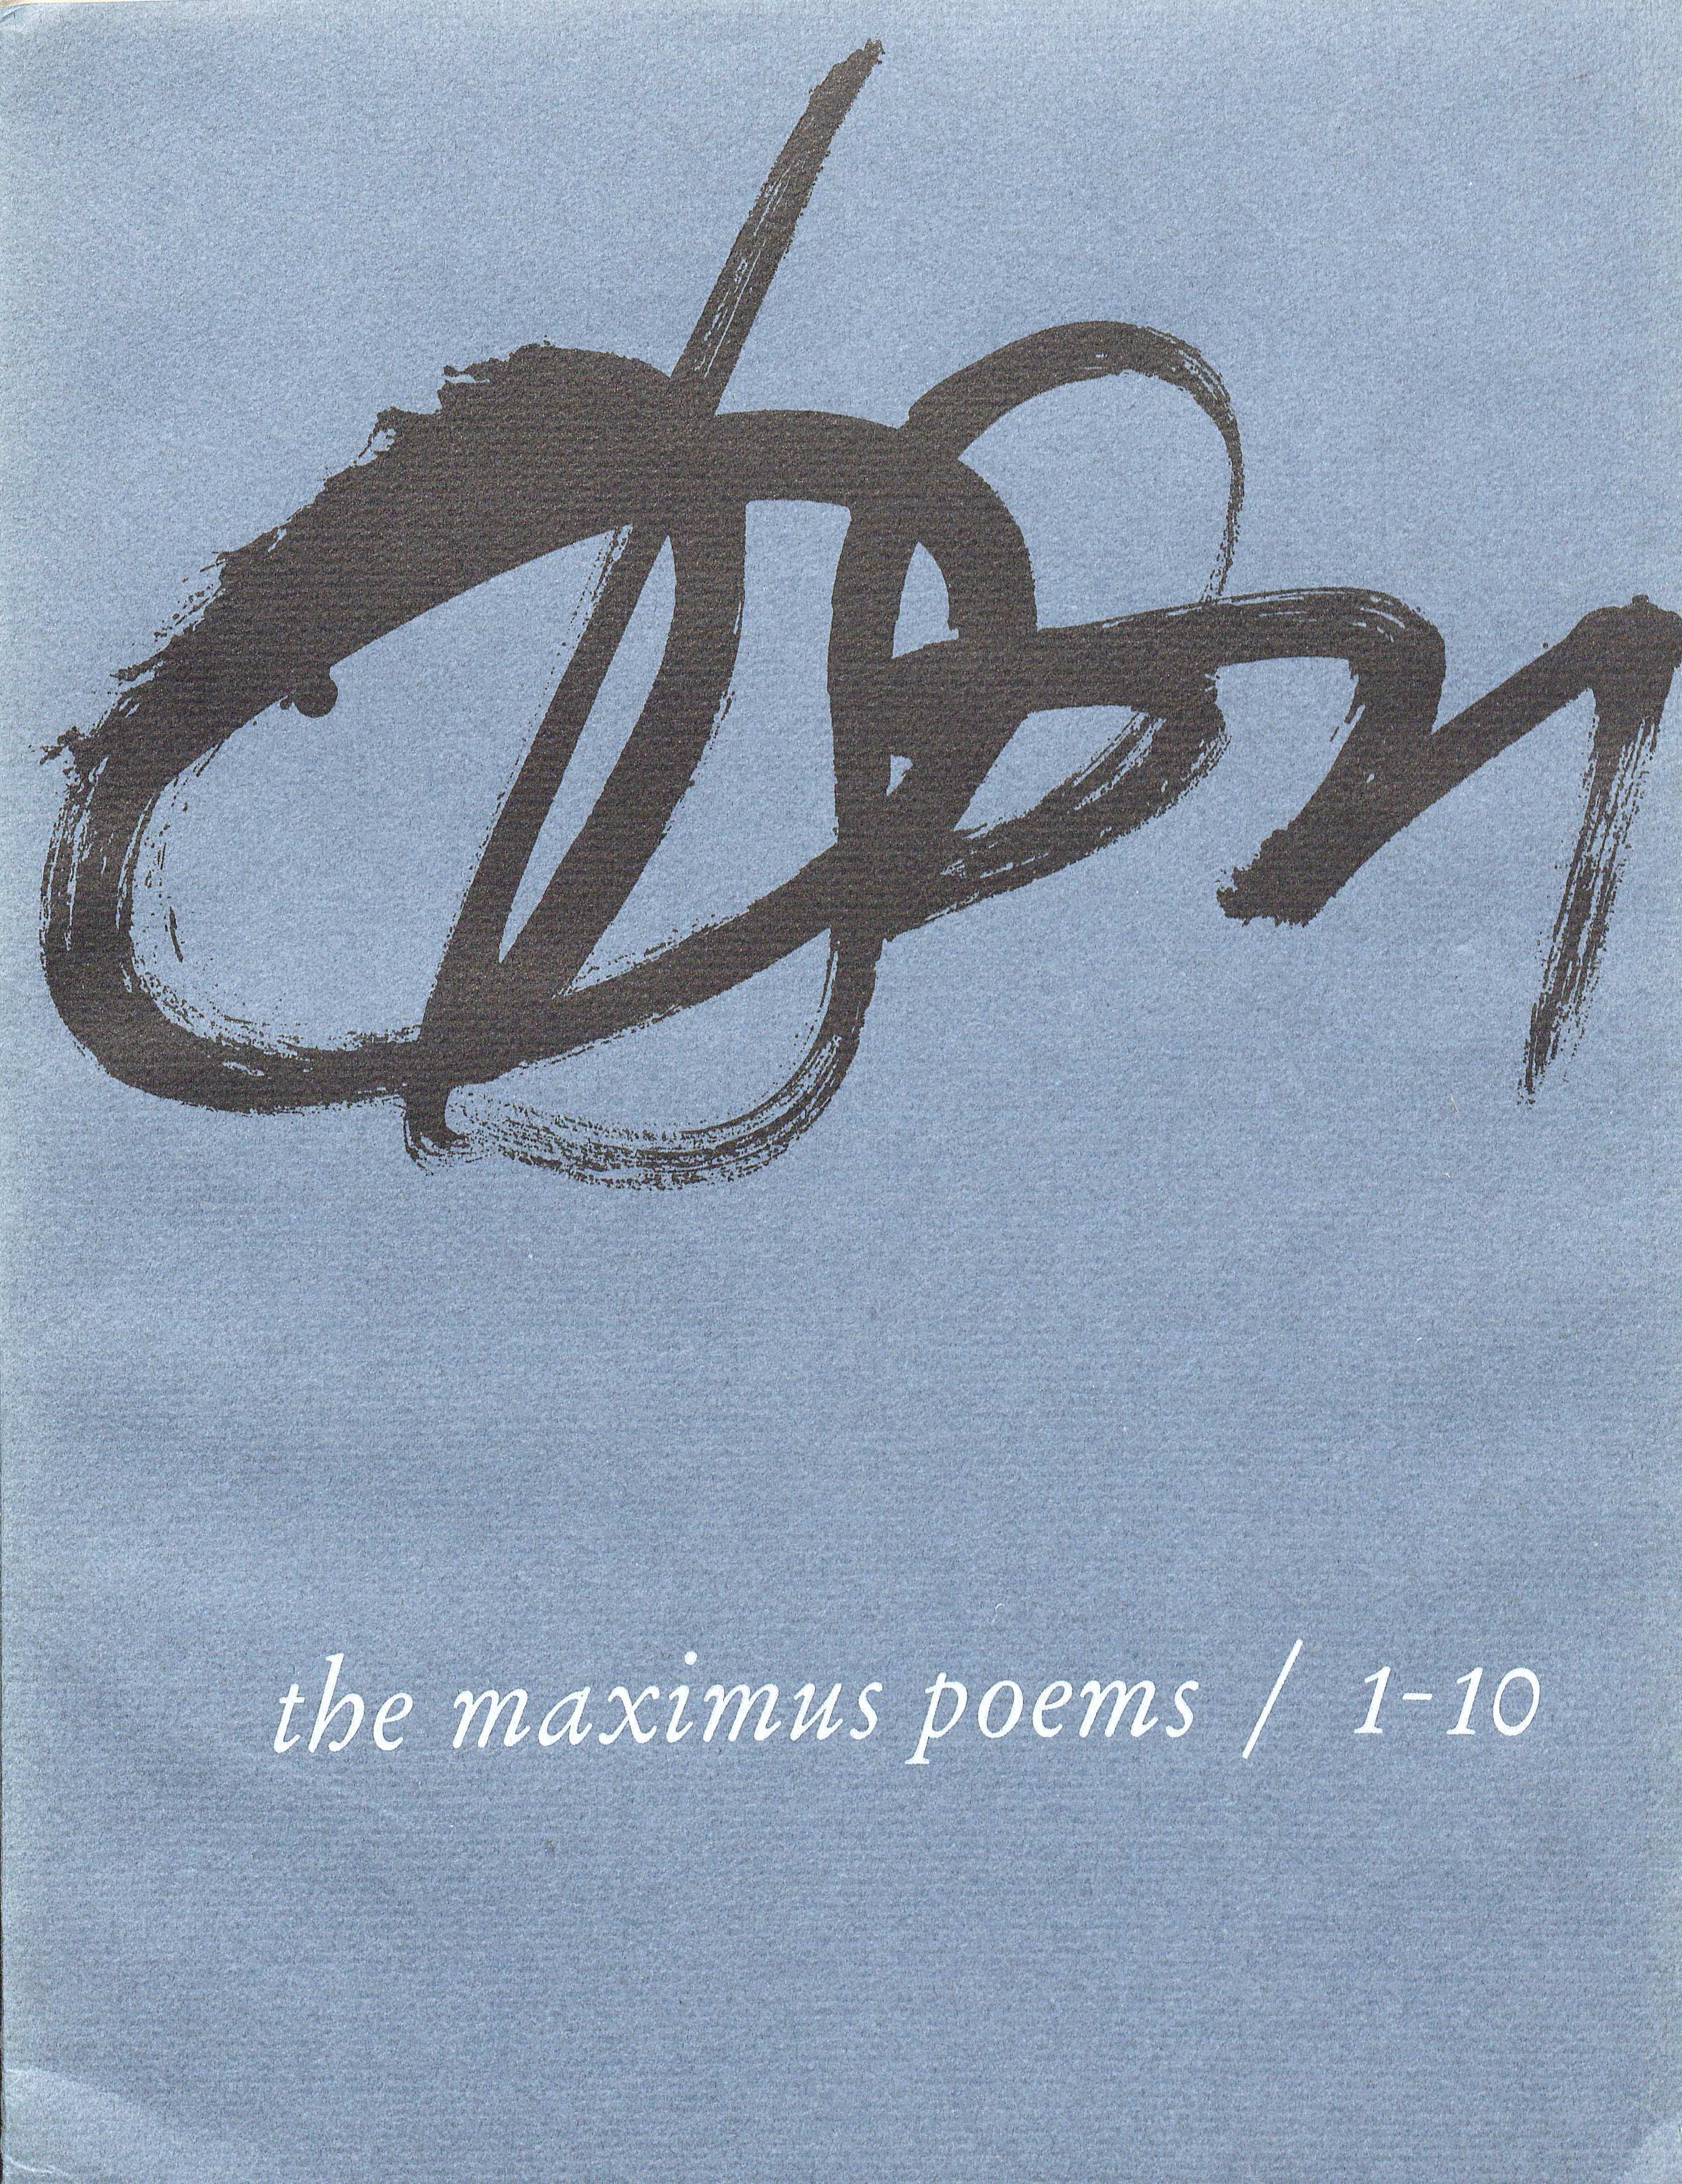 First printing of Olson's celebrated The Maximus Poems